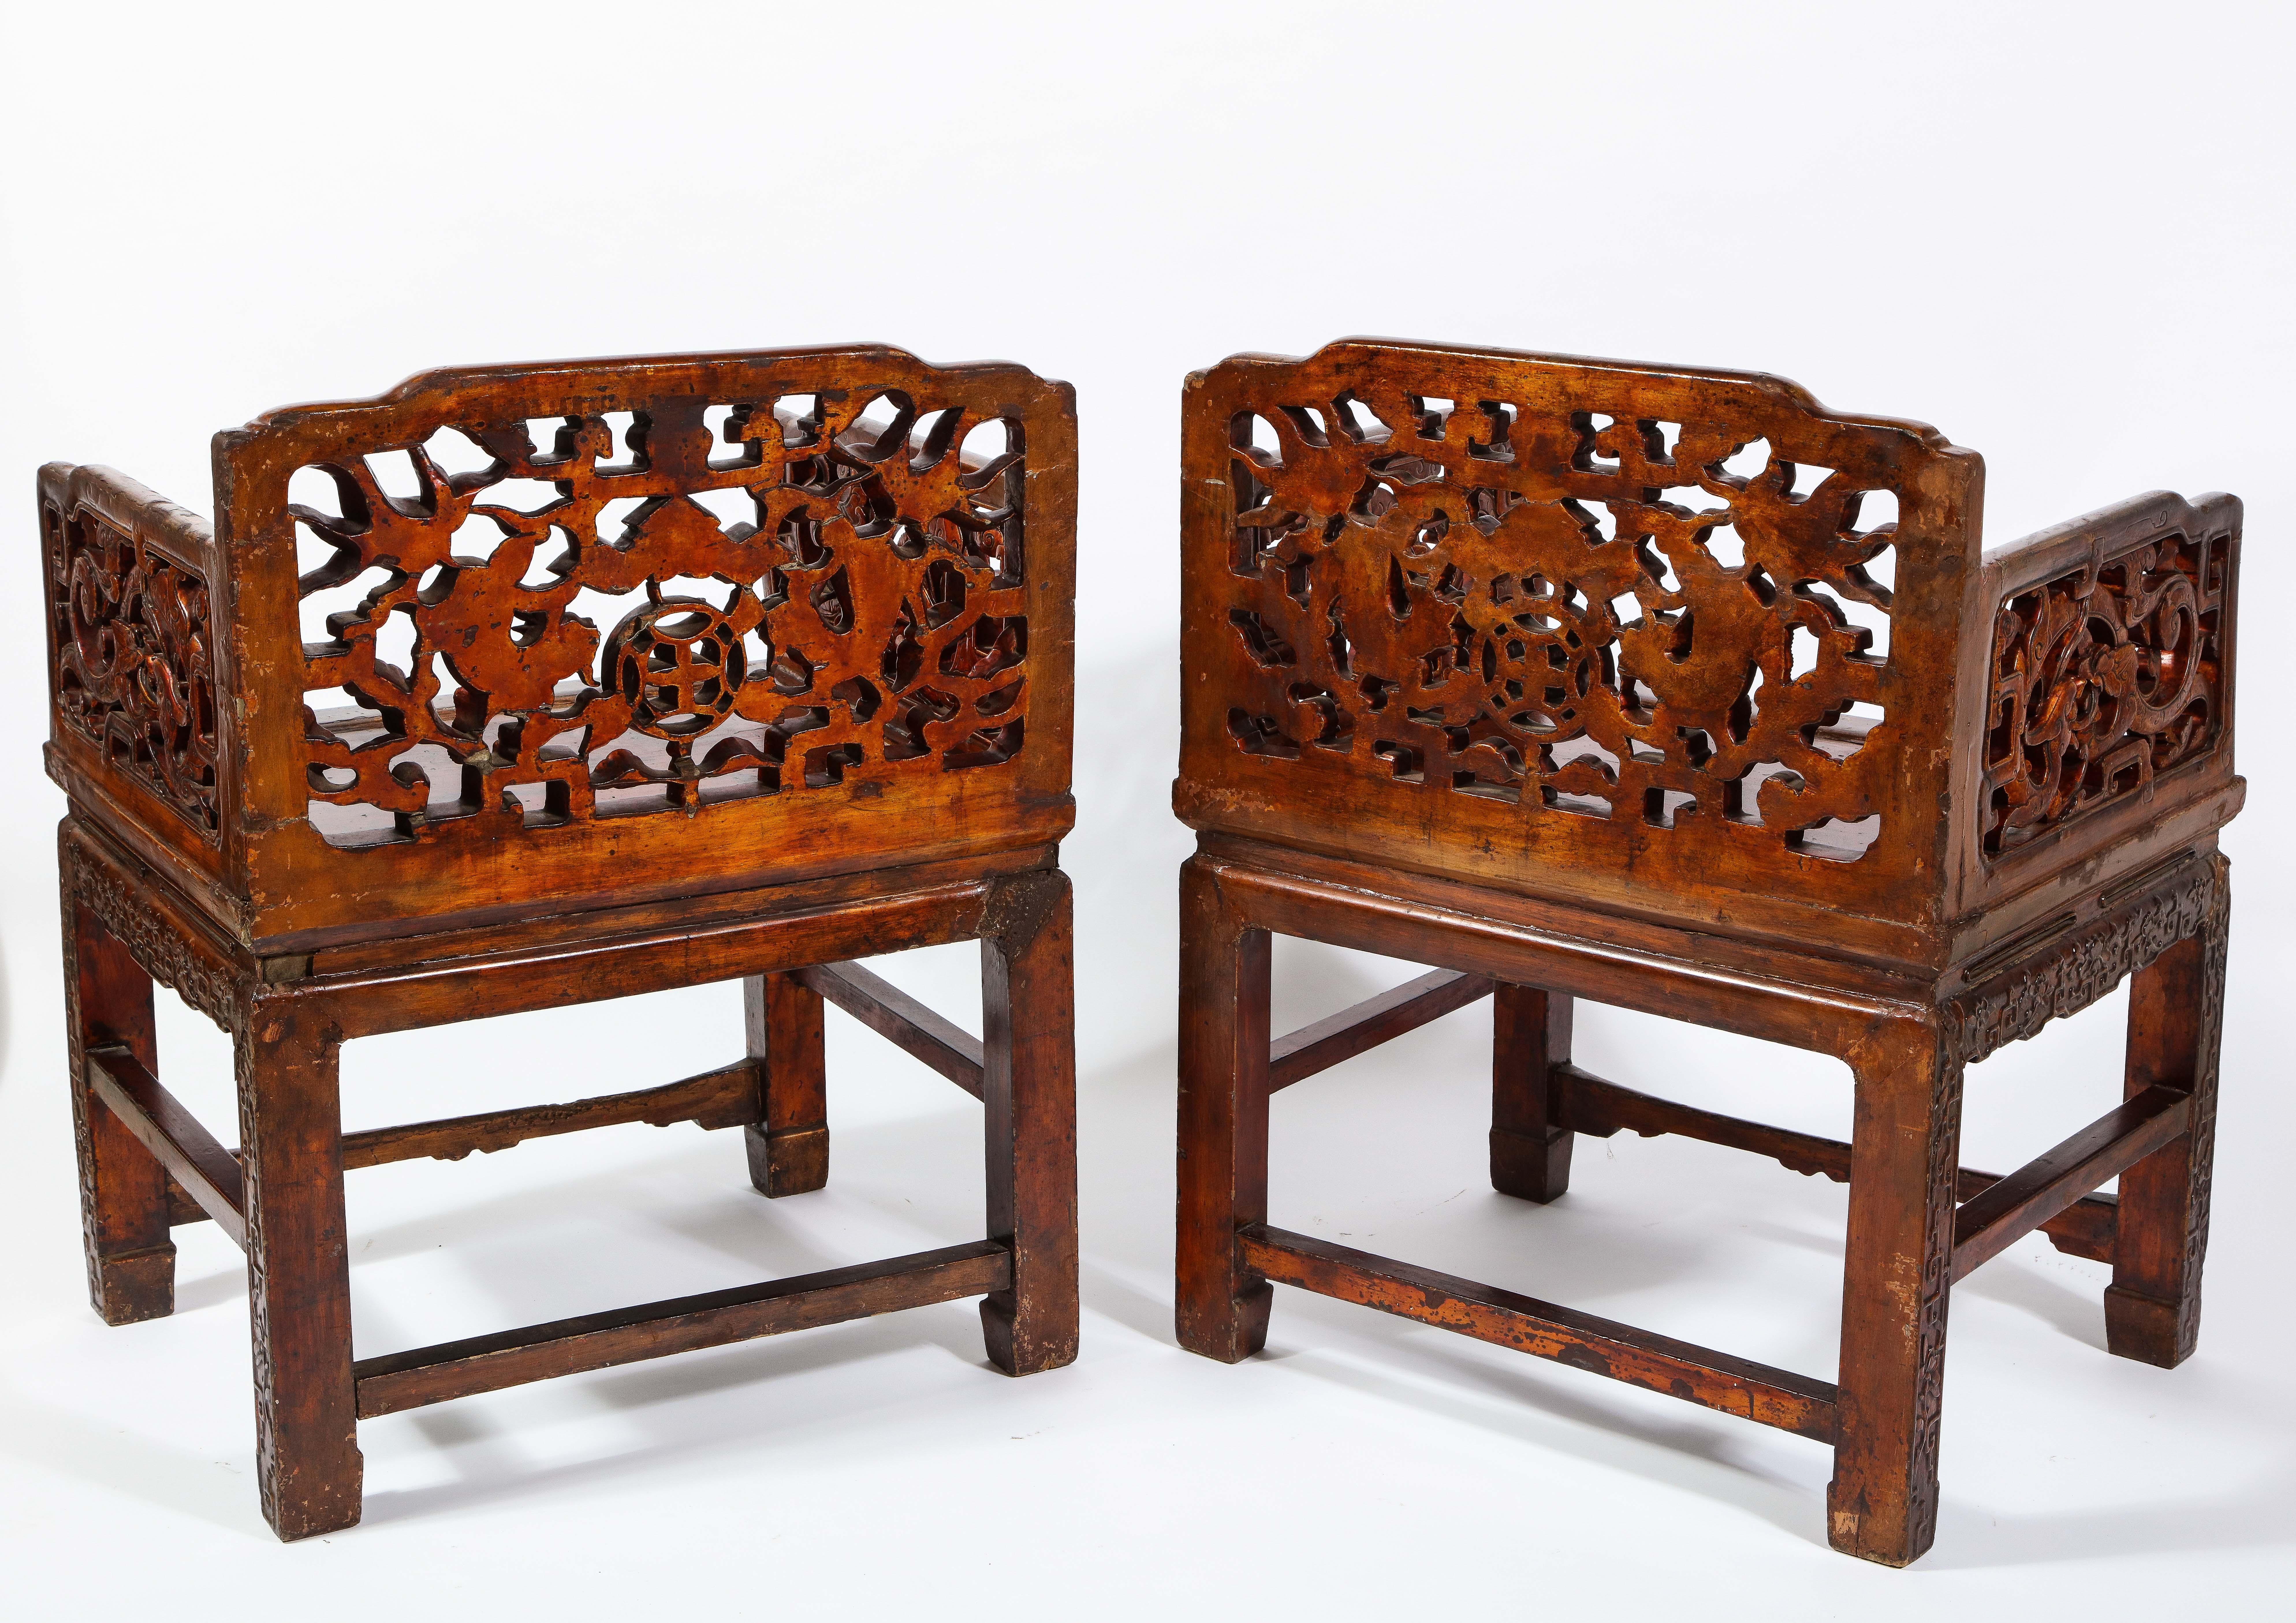 Mid-19th Century Pair of 19th Century Chinese Lacquered Hardwood Open Work Throne Chairs